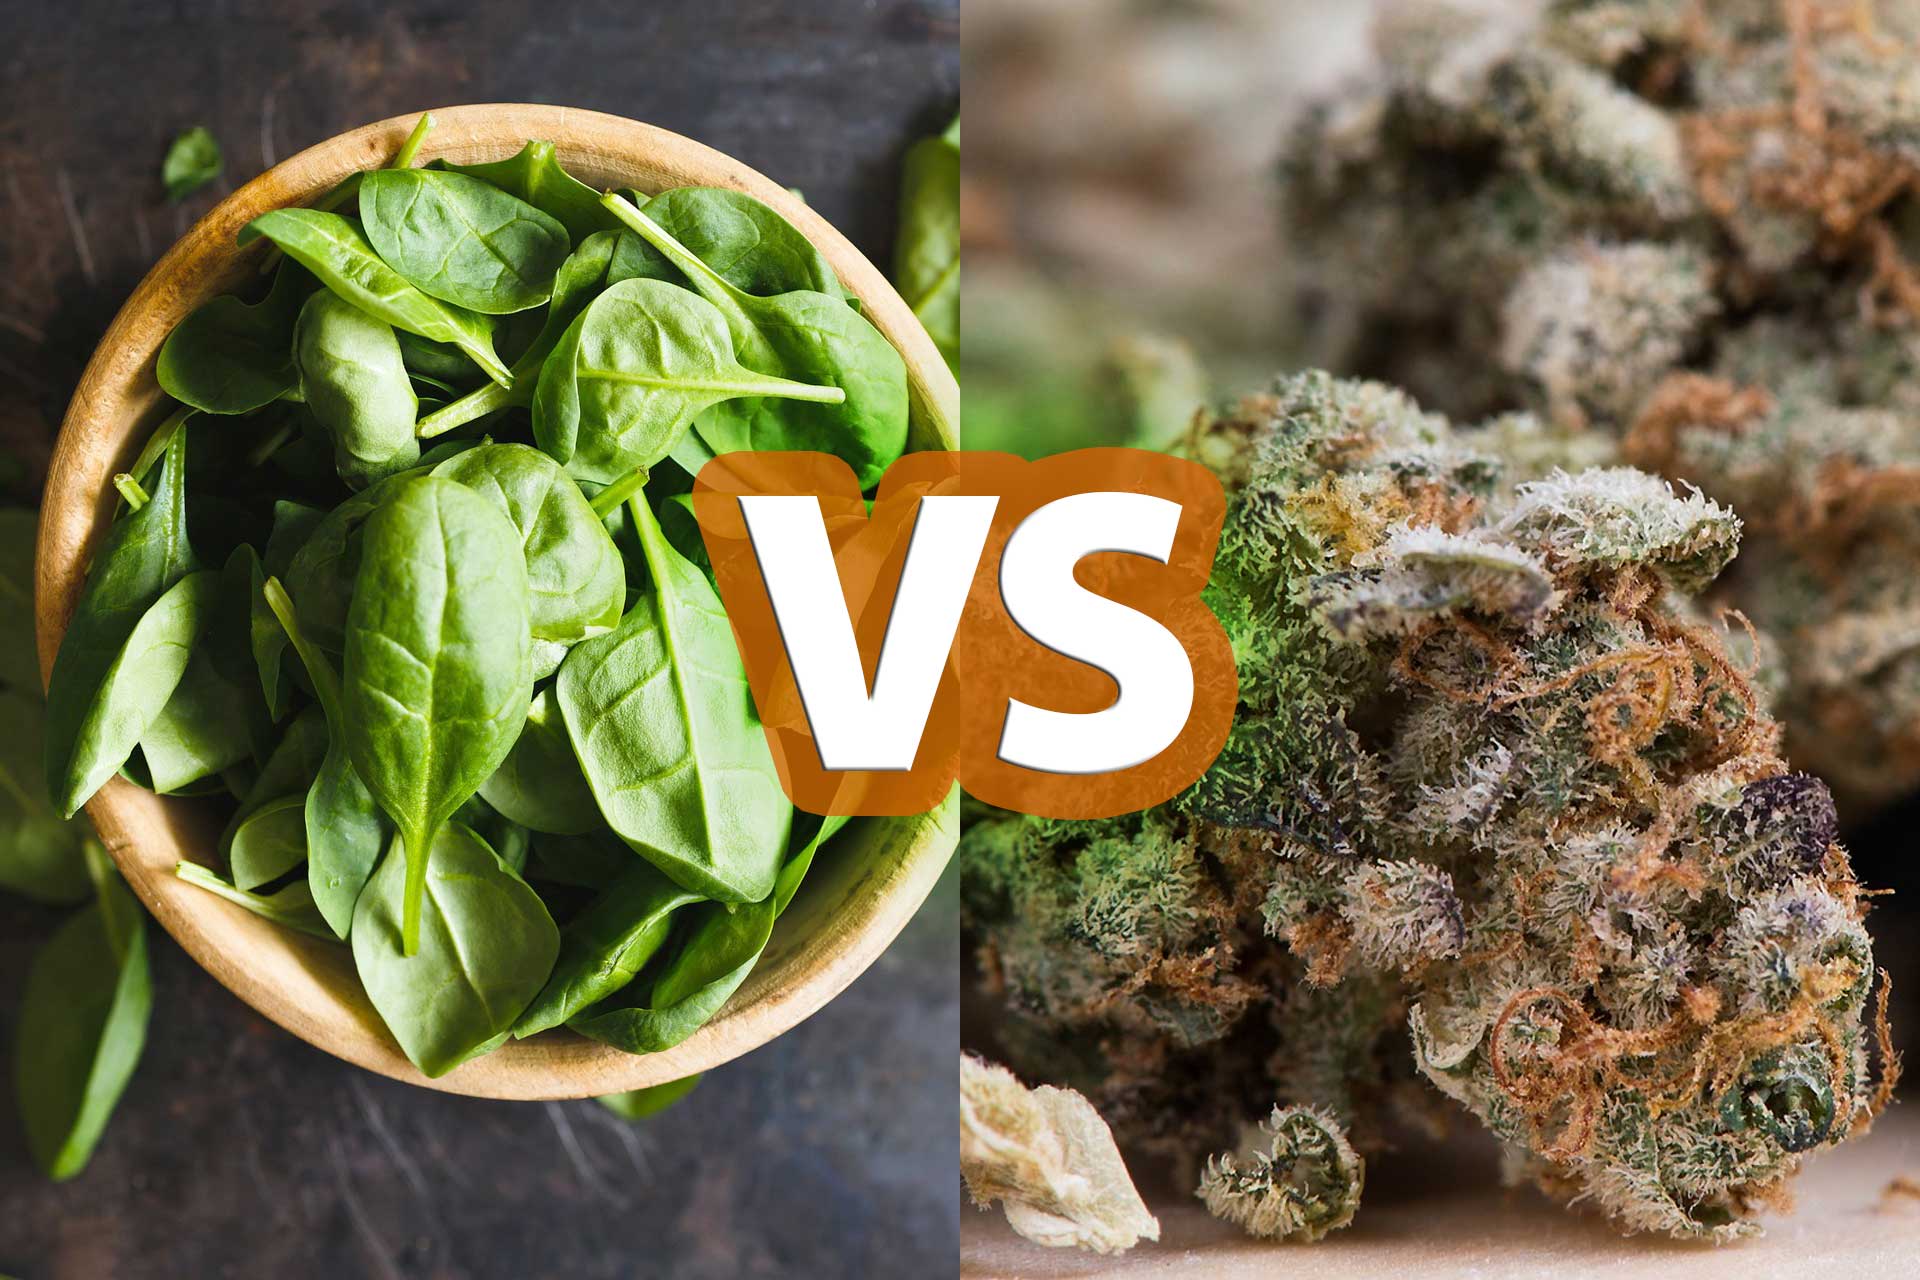 Spinach vs Marijuana: Which One Is More Likely To Kill You?